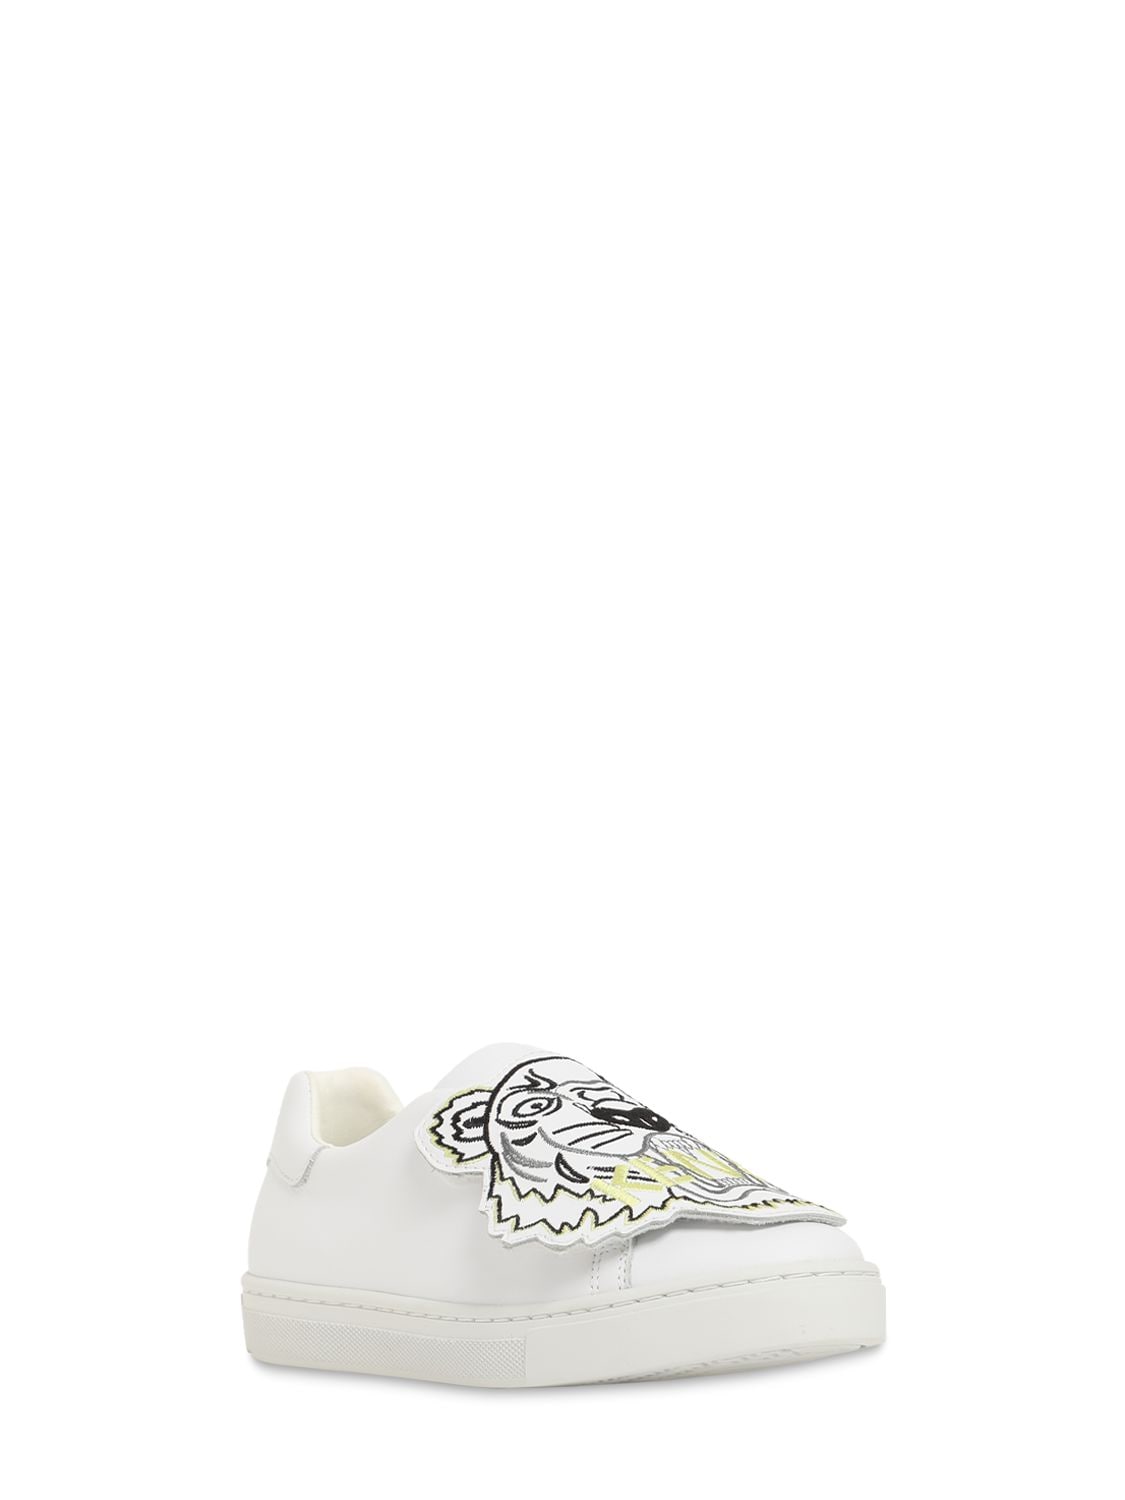 Kenzo  K59039  boys's Shoes (Trainers) in White - K59039-10B-J